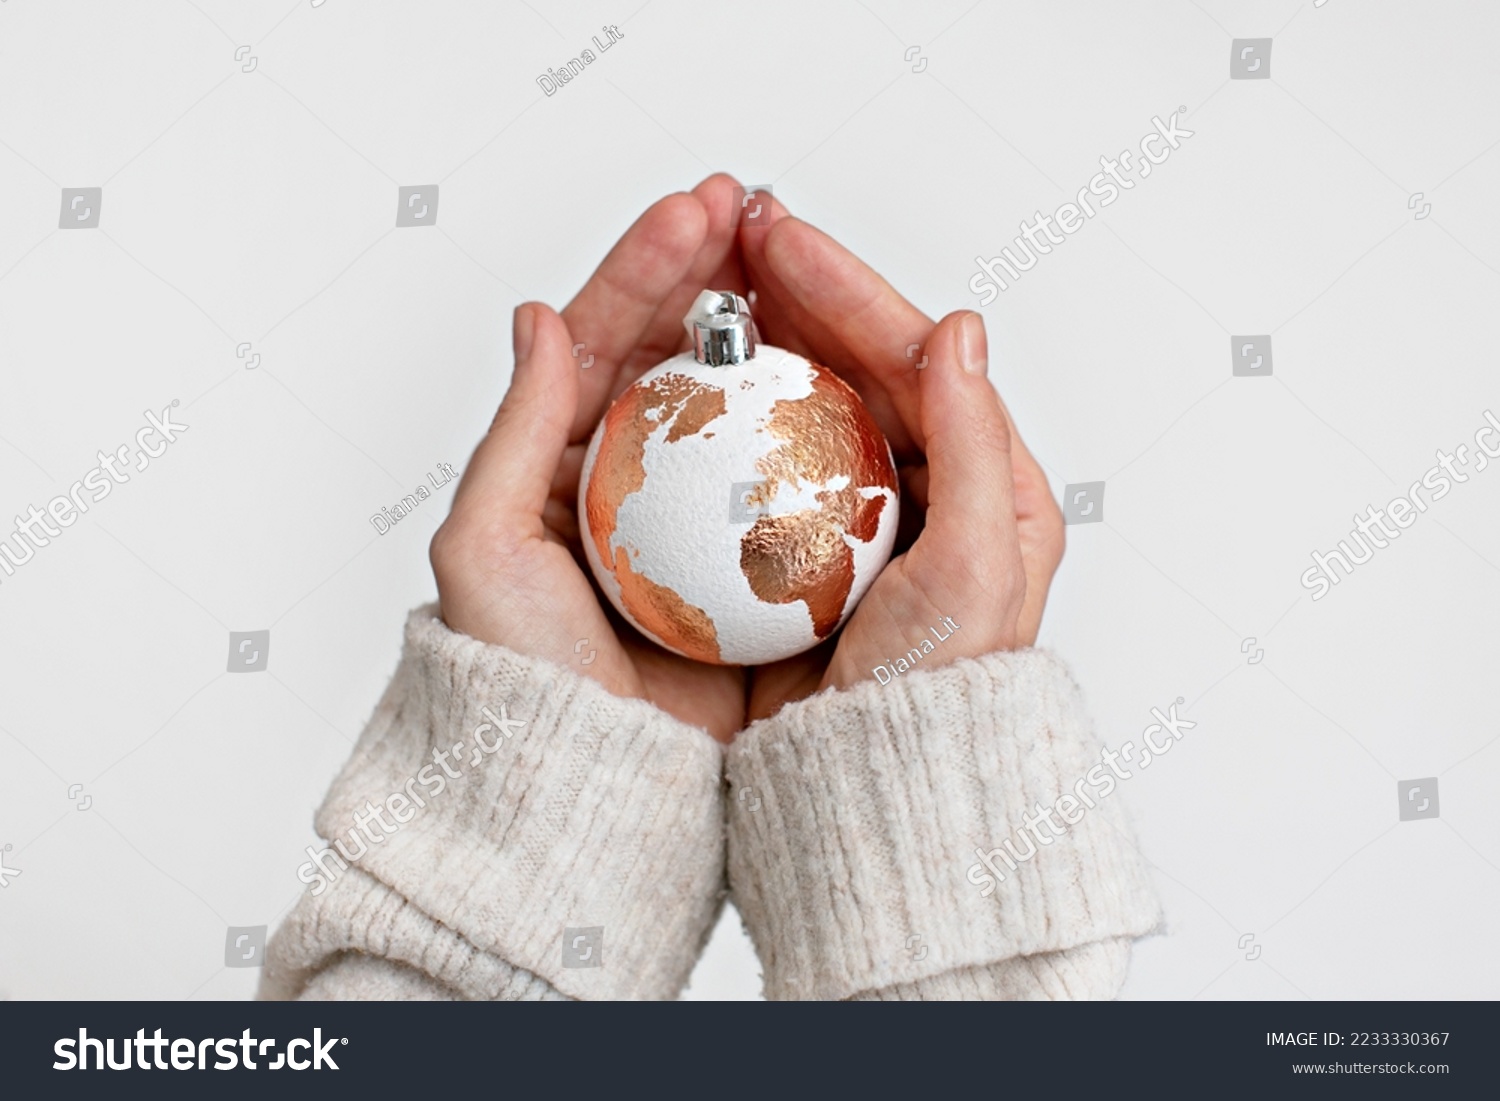 White Christmas ball in the form of a globe with a gold leaf holding carefully with two hands. The concept of caring for our planet. Solving problems in the new year. Hope and wish for peace on Earth. #2233330367